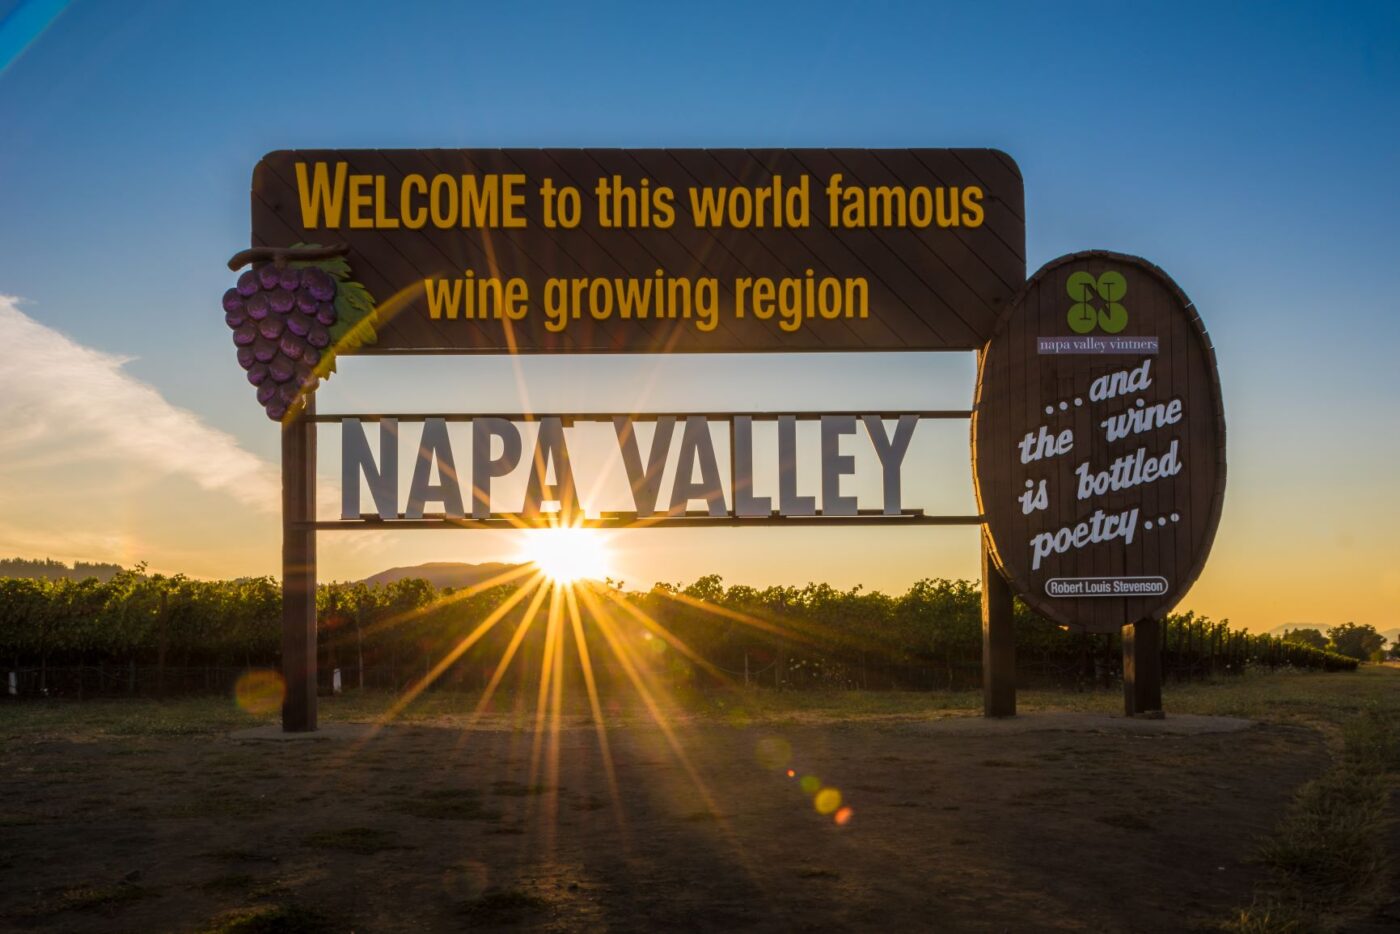 Image of a sign in front of a vineyard with the reflection of the sun. The sign says Napa Valley, welcome to this world famous wine growing region... and the wine is bottle poetry...